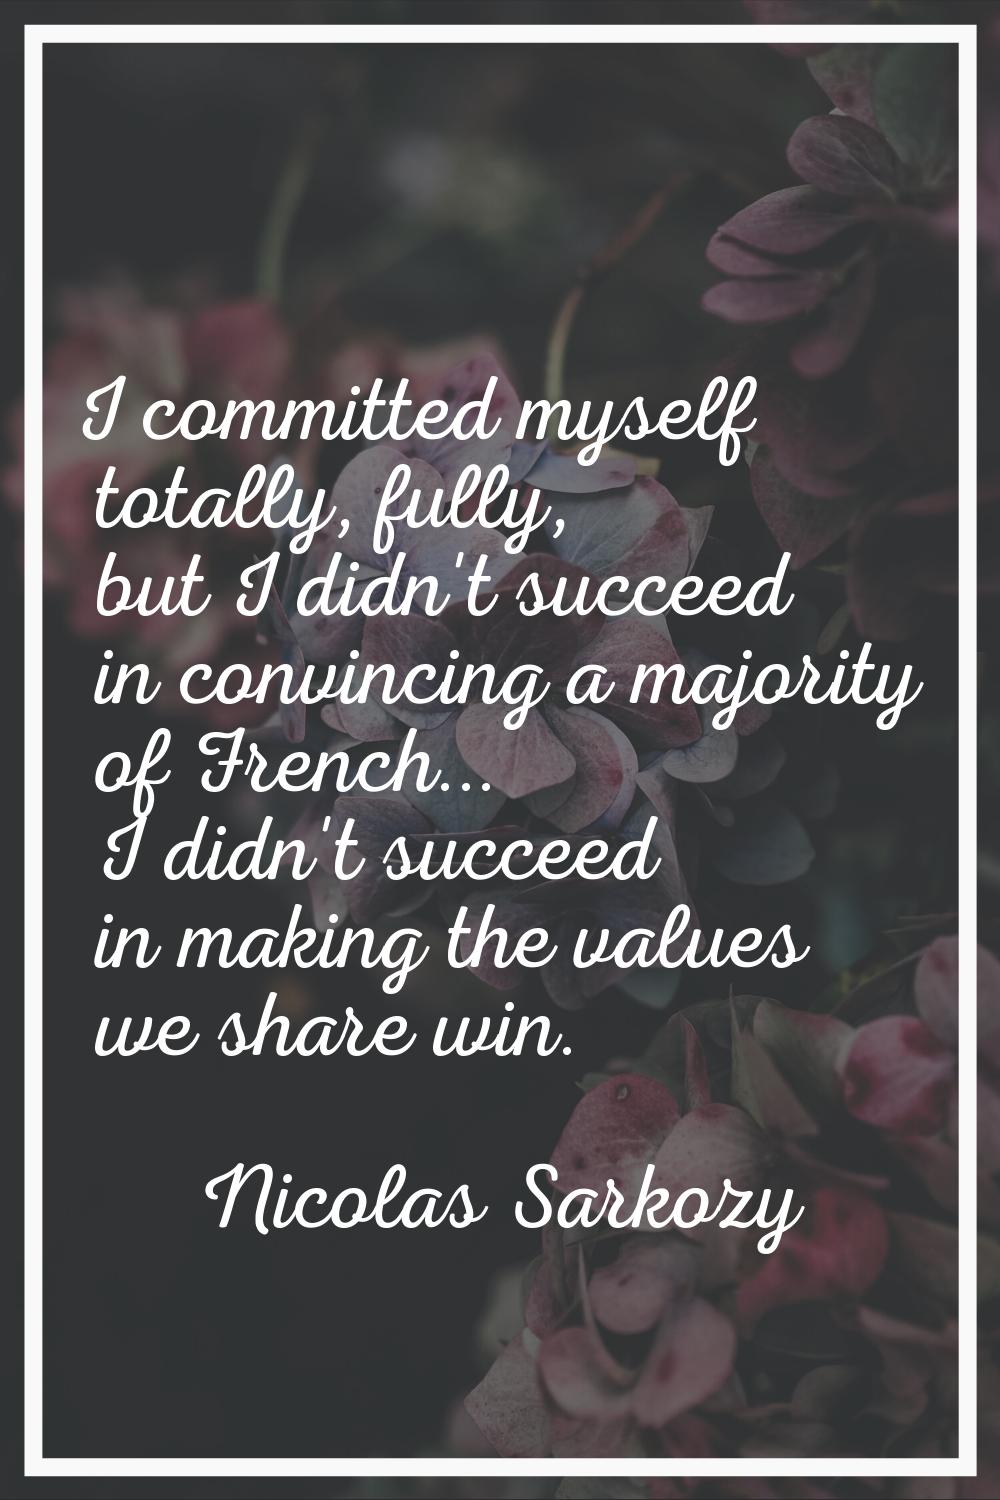 I committed myself totally, fully, but I didn't succeed in convincing a majority of French... I did